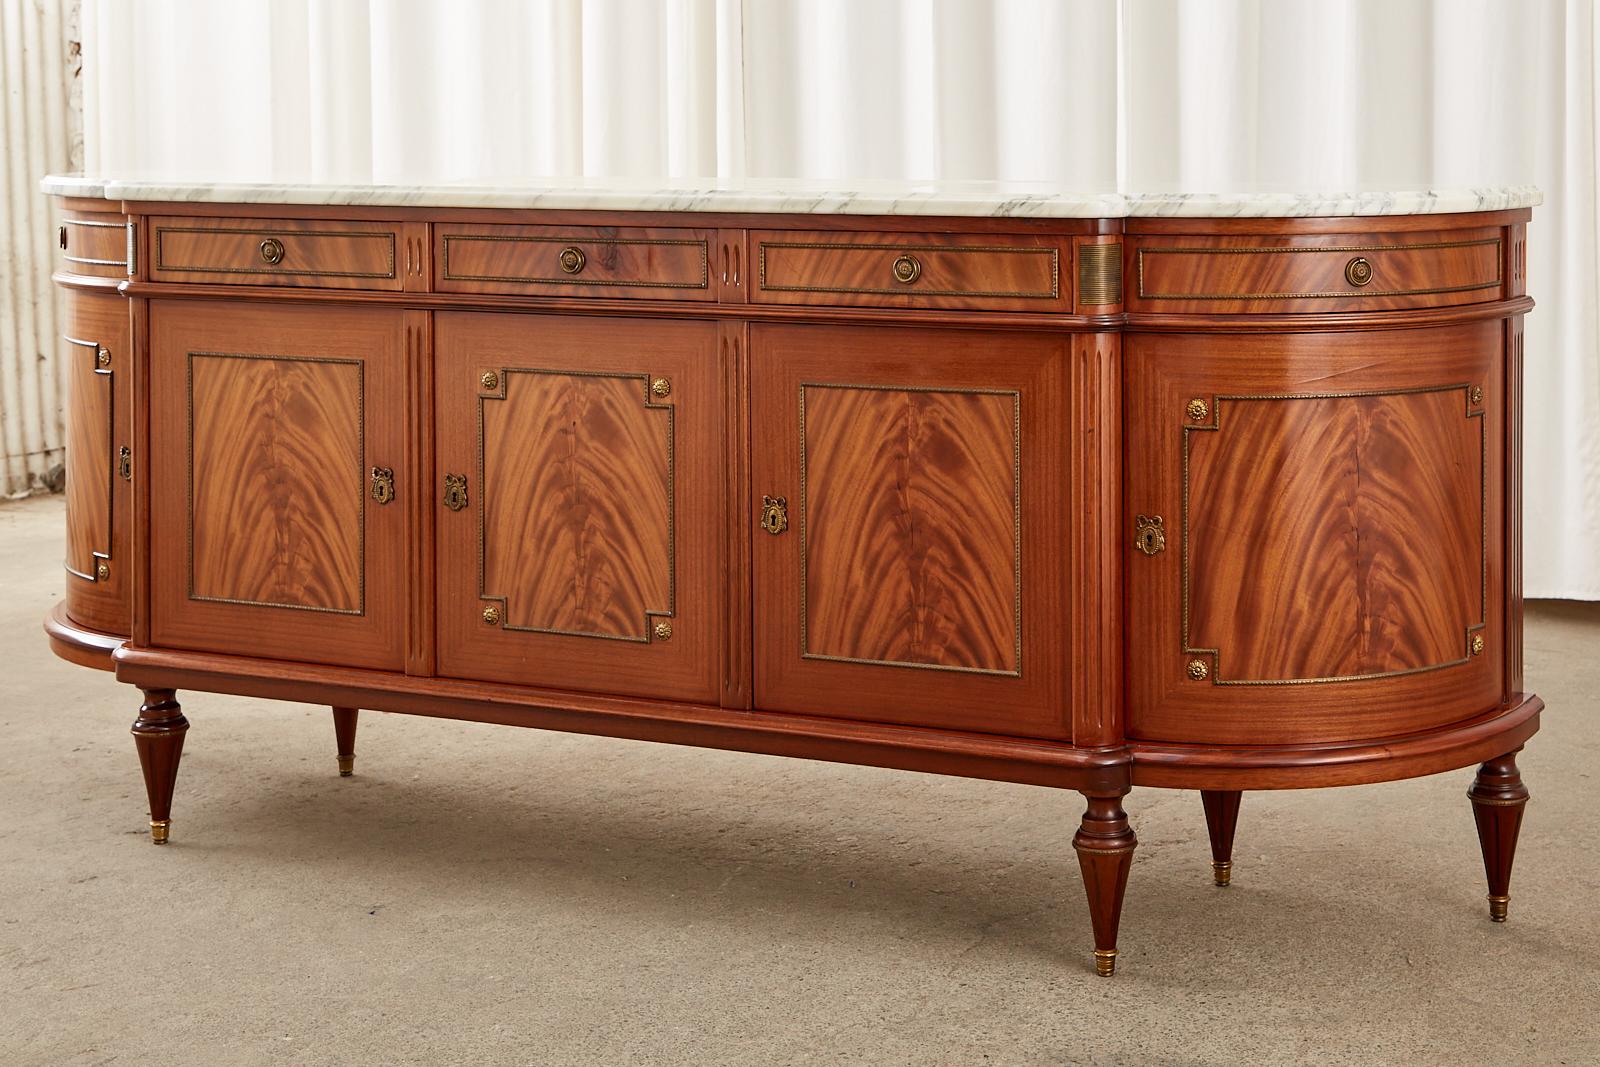 Grand French mahogany sideboard server or buffet featuring a 1 inch thick Carrara marble slab top with a conforming ogee edge. Crafted in the neoclassical Louis XVI taste with bronze mounts. The case is constructed with radiant mahogany and features